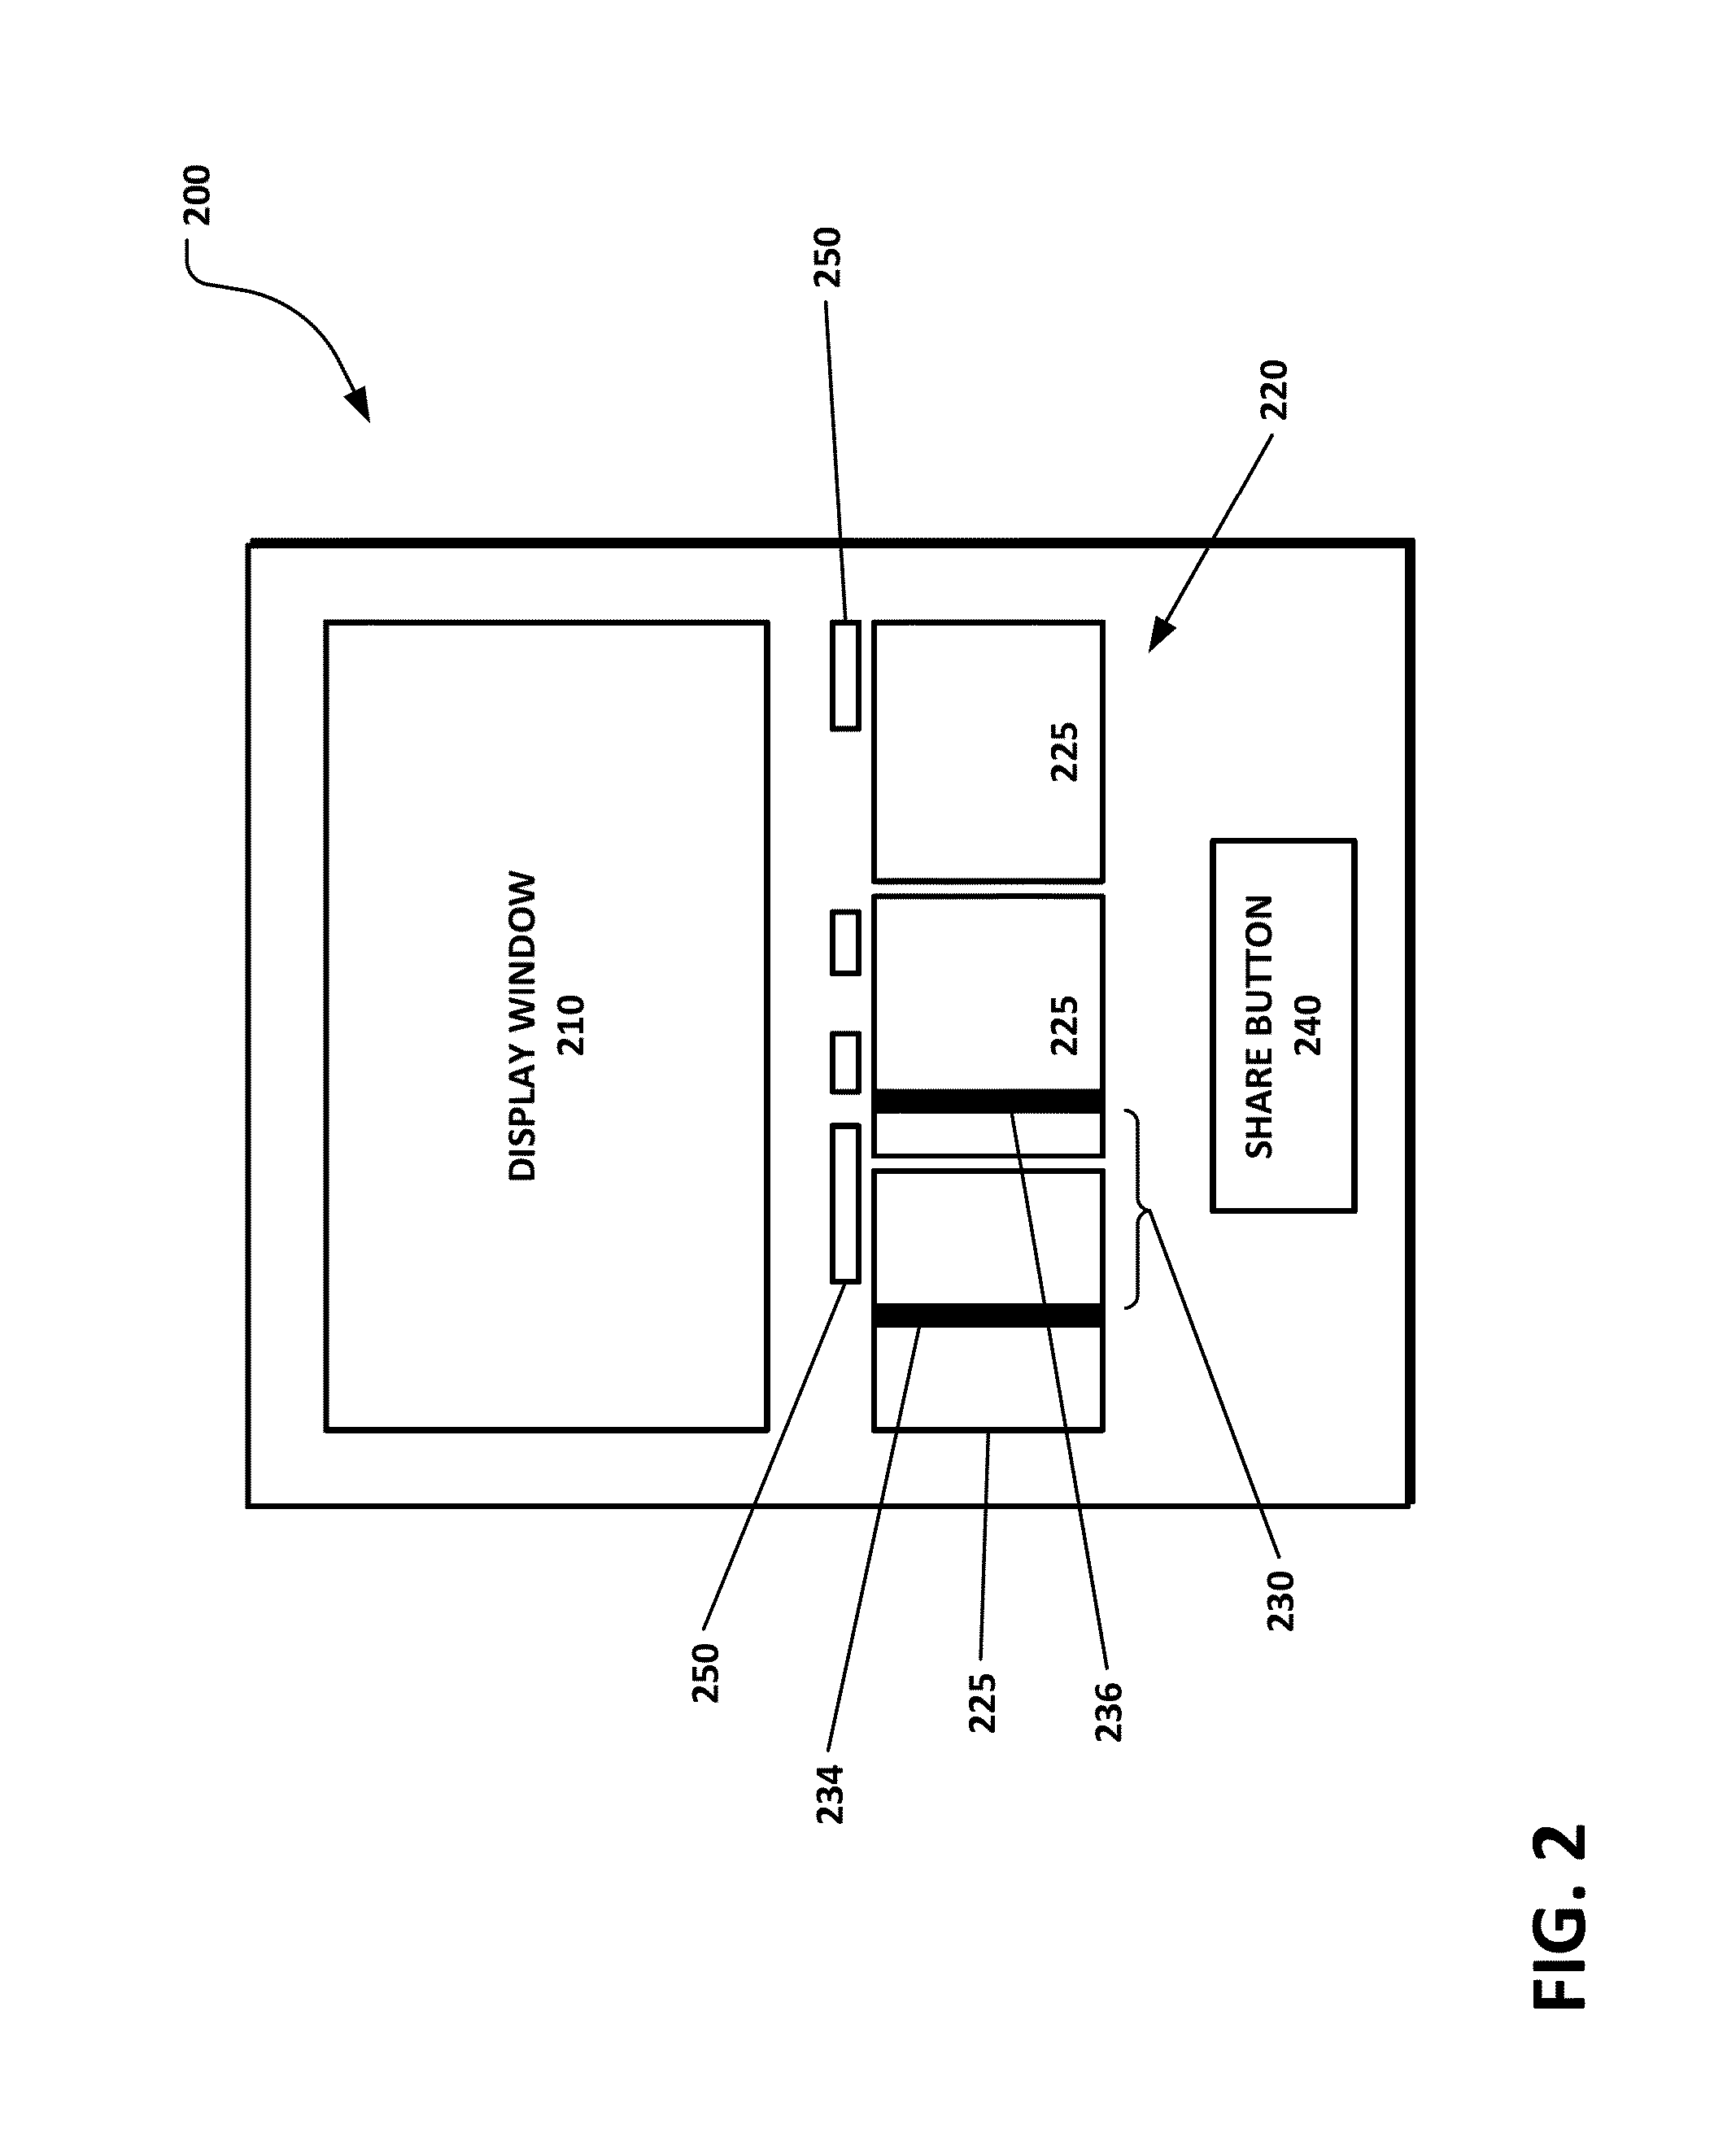 Systems and methods for identifying media portions of interest